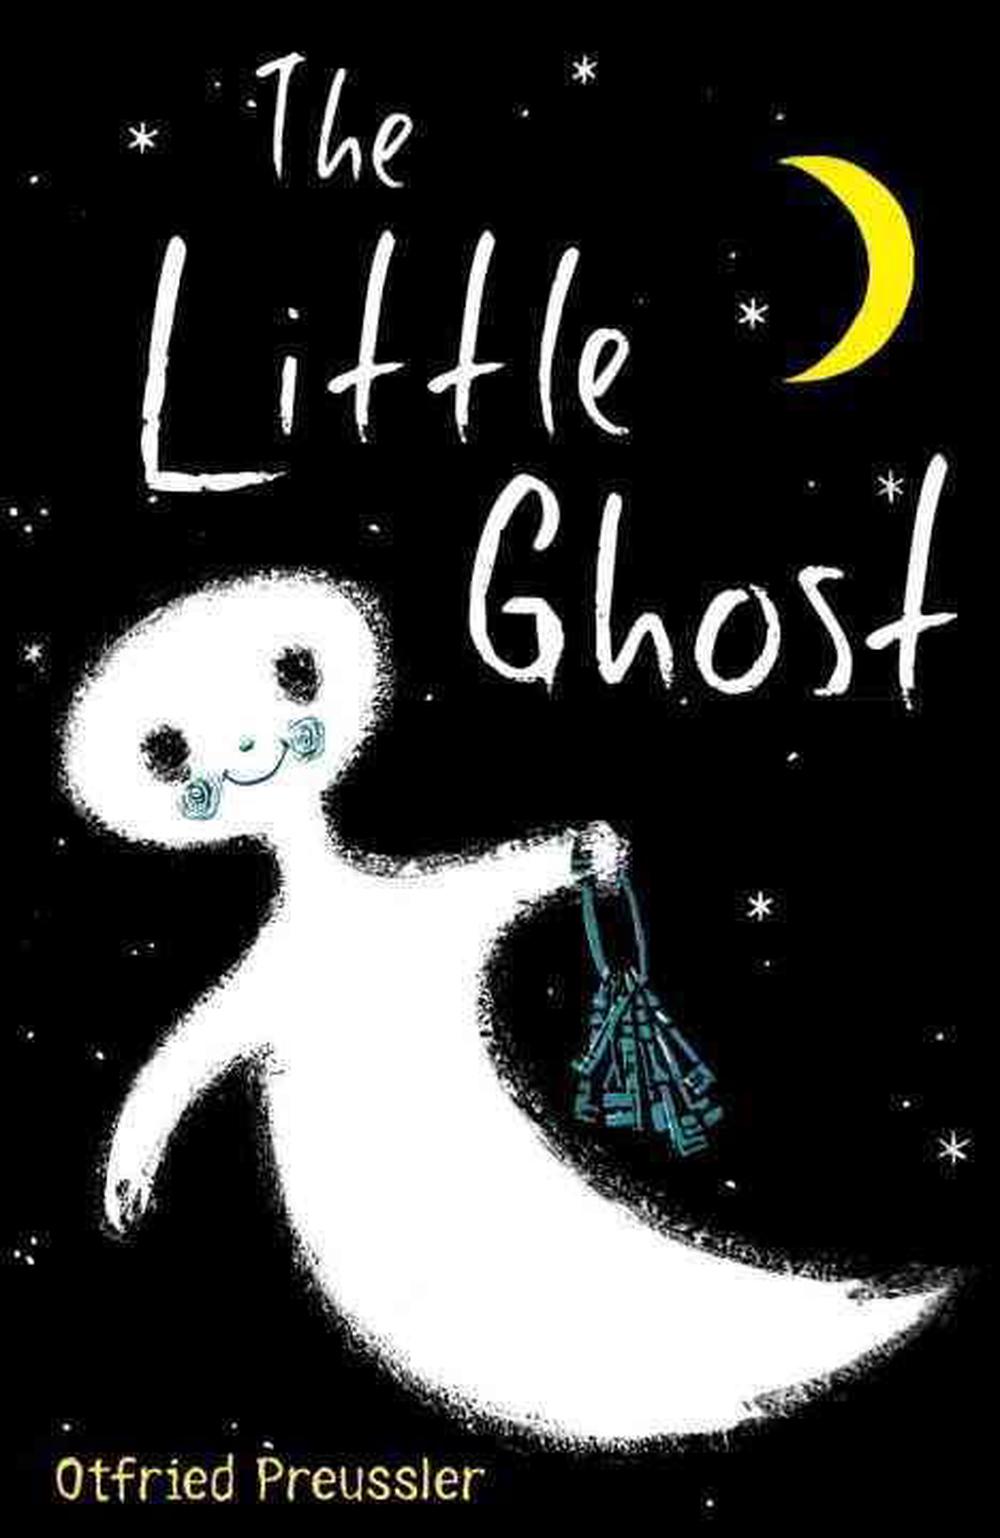 Little Ghost by Otfried Preussler, 9781849397711 | Buy online at The Nile